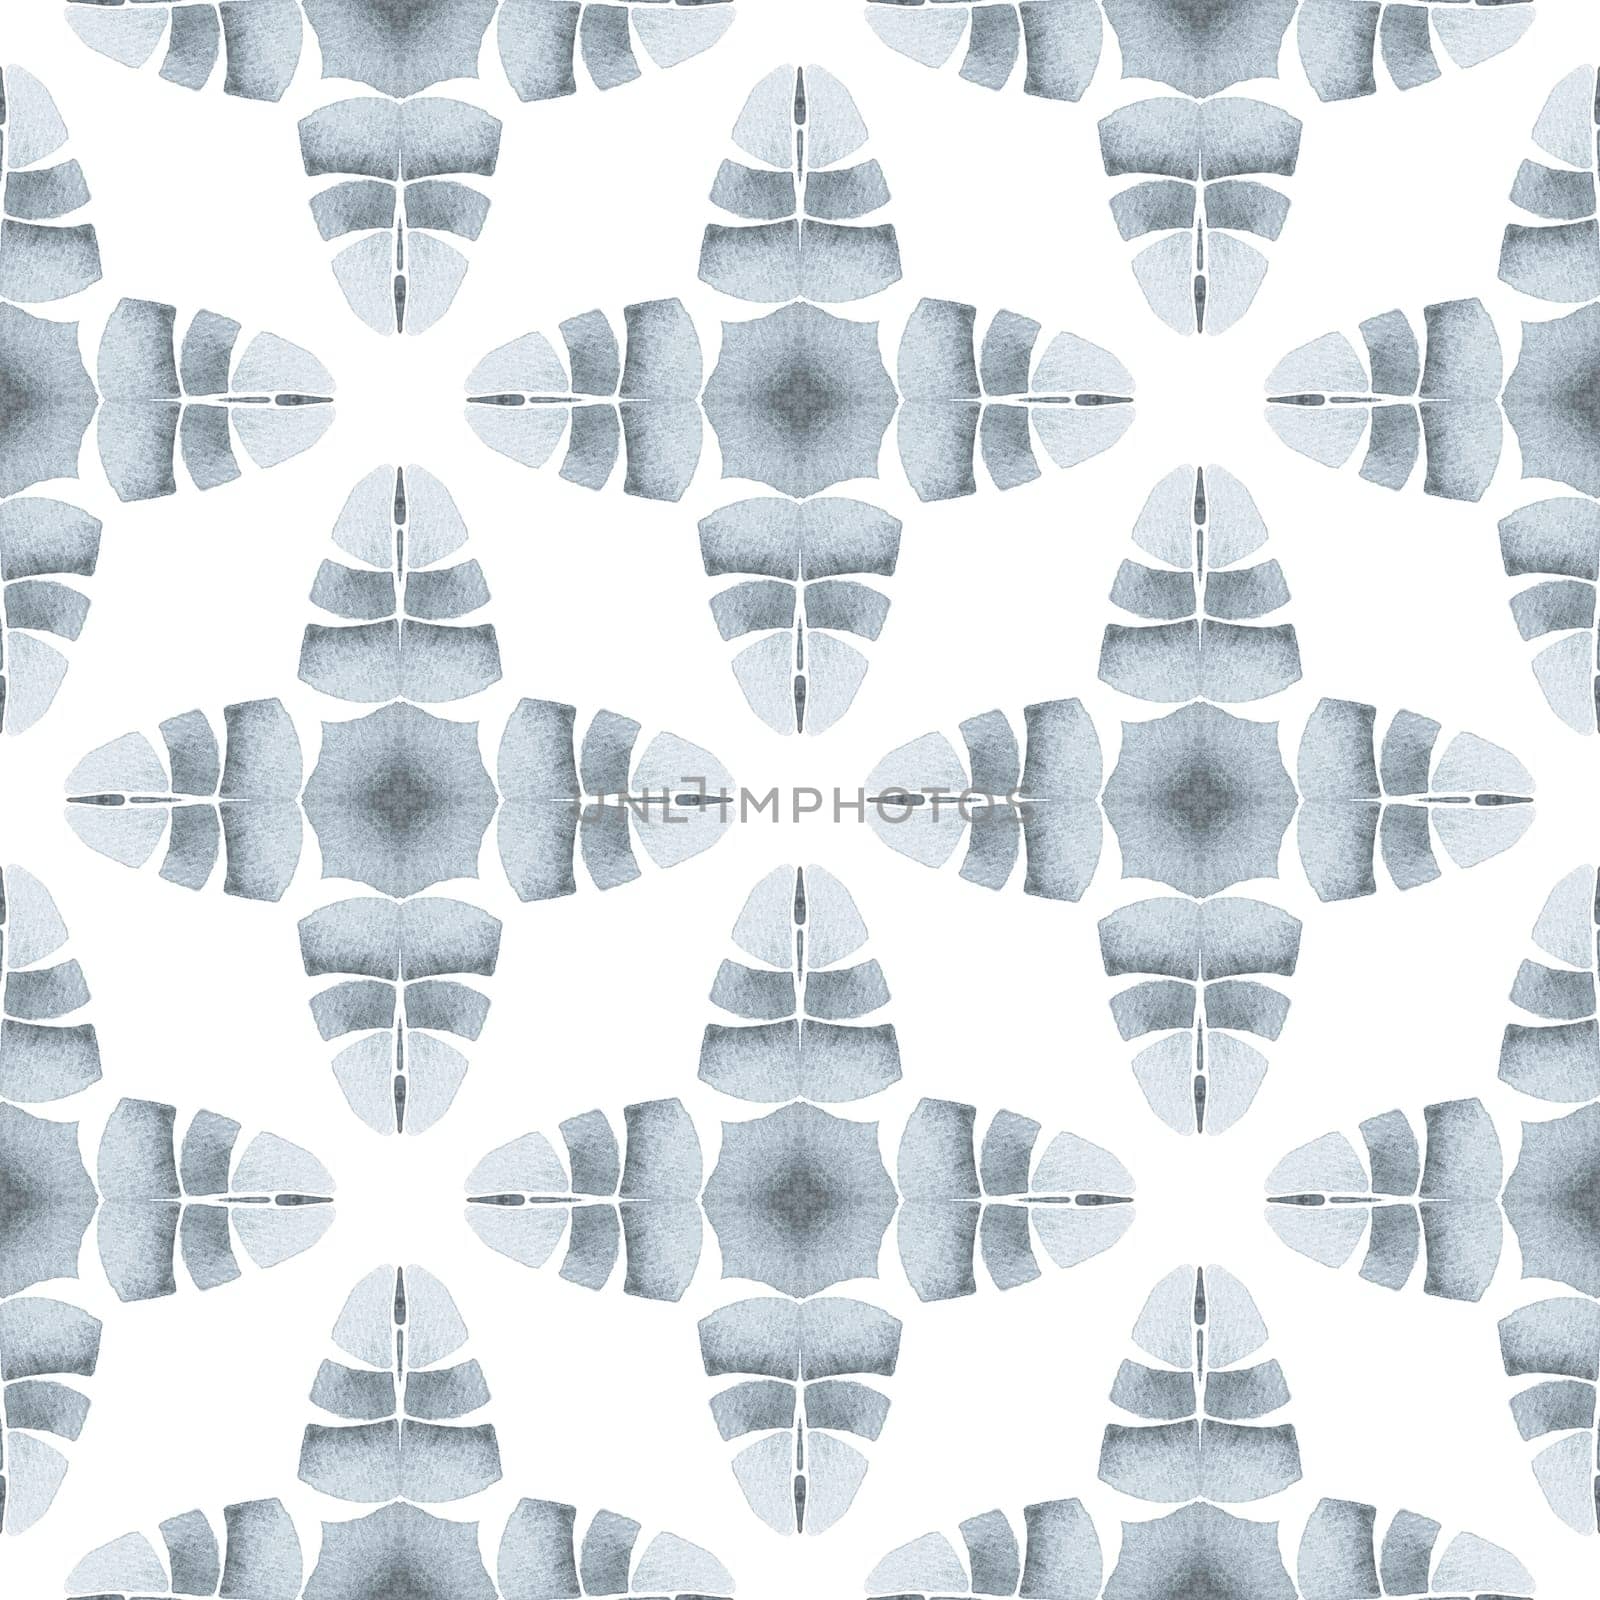 Textile ready valuable print, swimwear fabric, wallpaper, wrapping. Black and white exotic boho chic summer design. Exotic seamless pattern. Summer exotic seamless border.